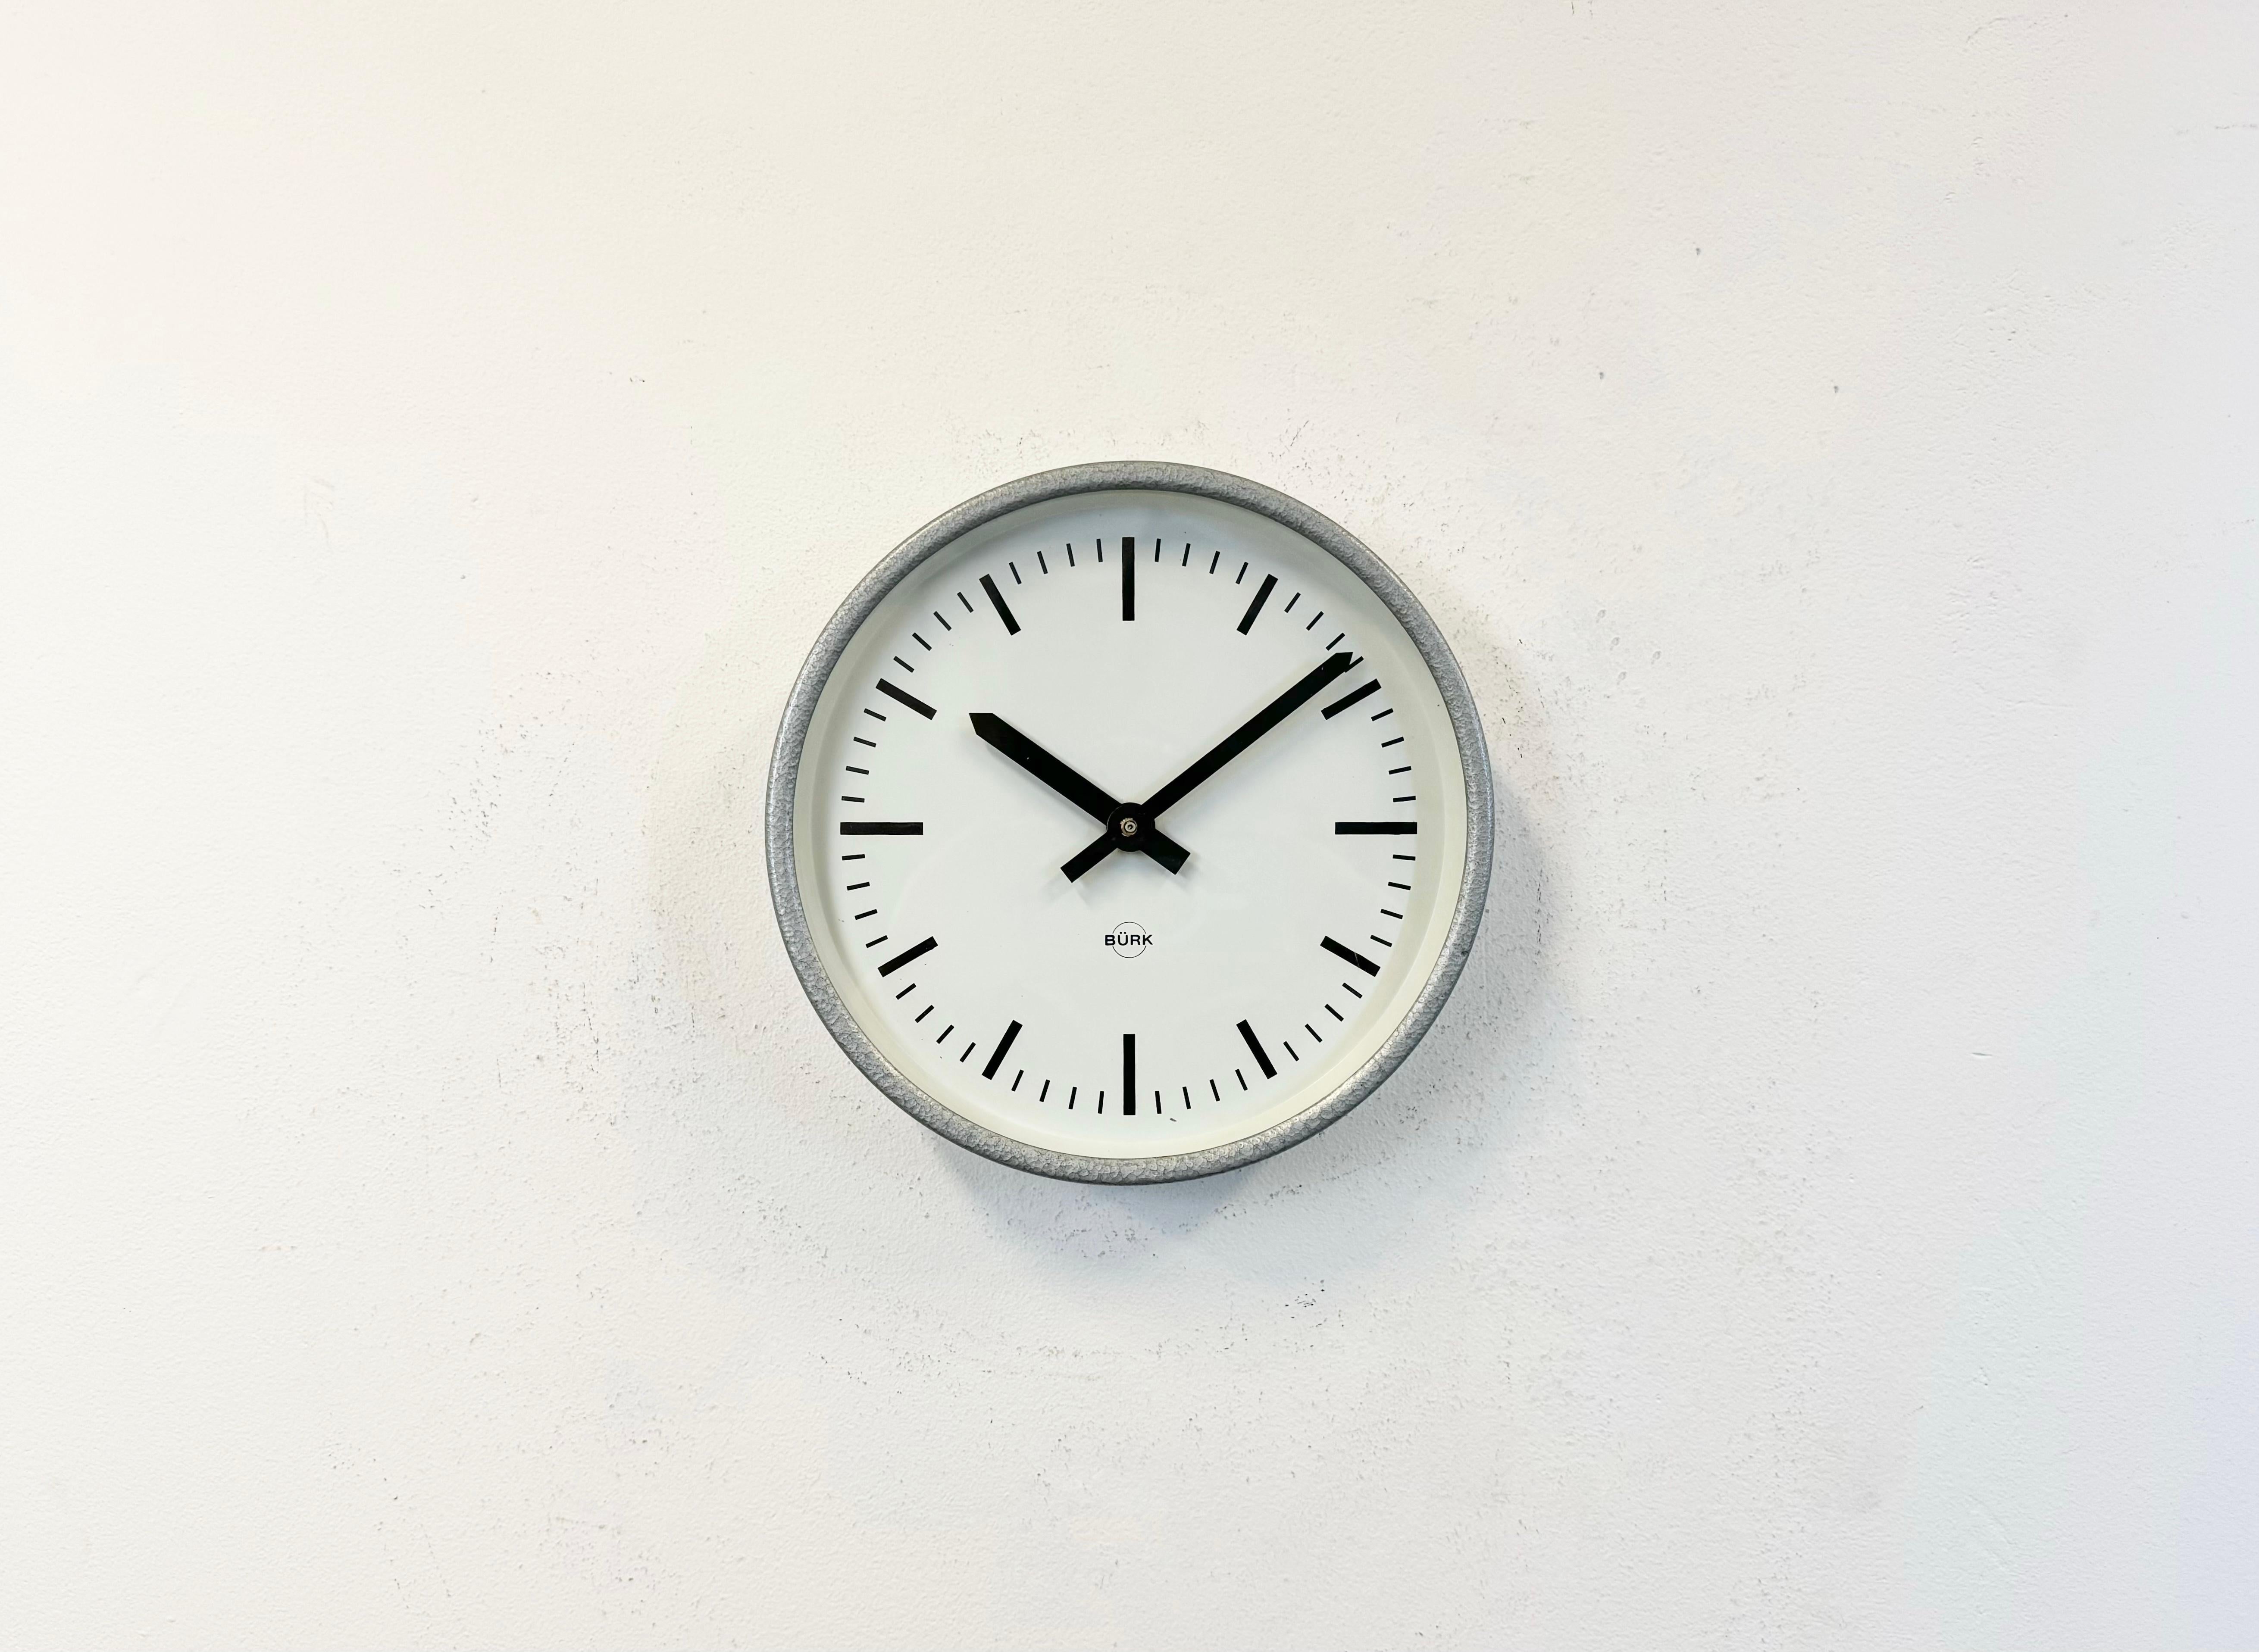 Burk wall clock was made in West Germany during the 1970s. It features a grey iron frame, a metal dial, an aluminium hands and a clear glass cover. The piece has been converted into a battery-powered clockwork and requires only one AA-battery. The